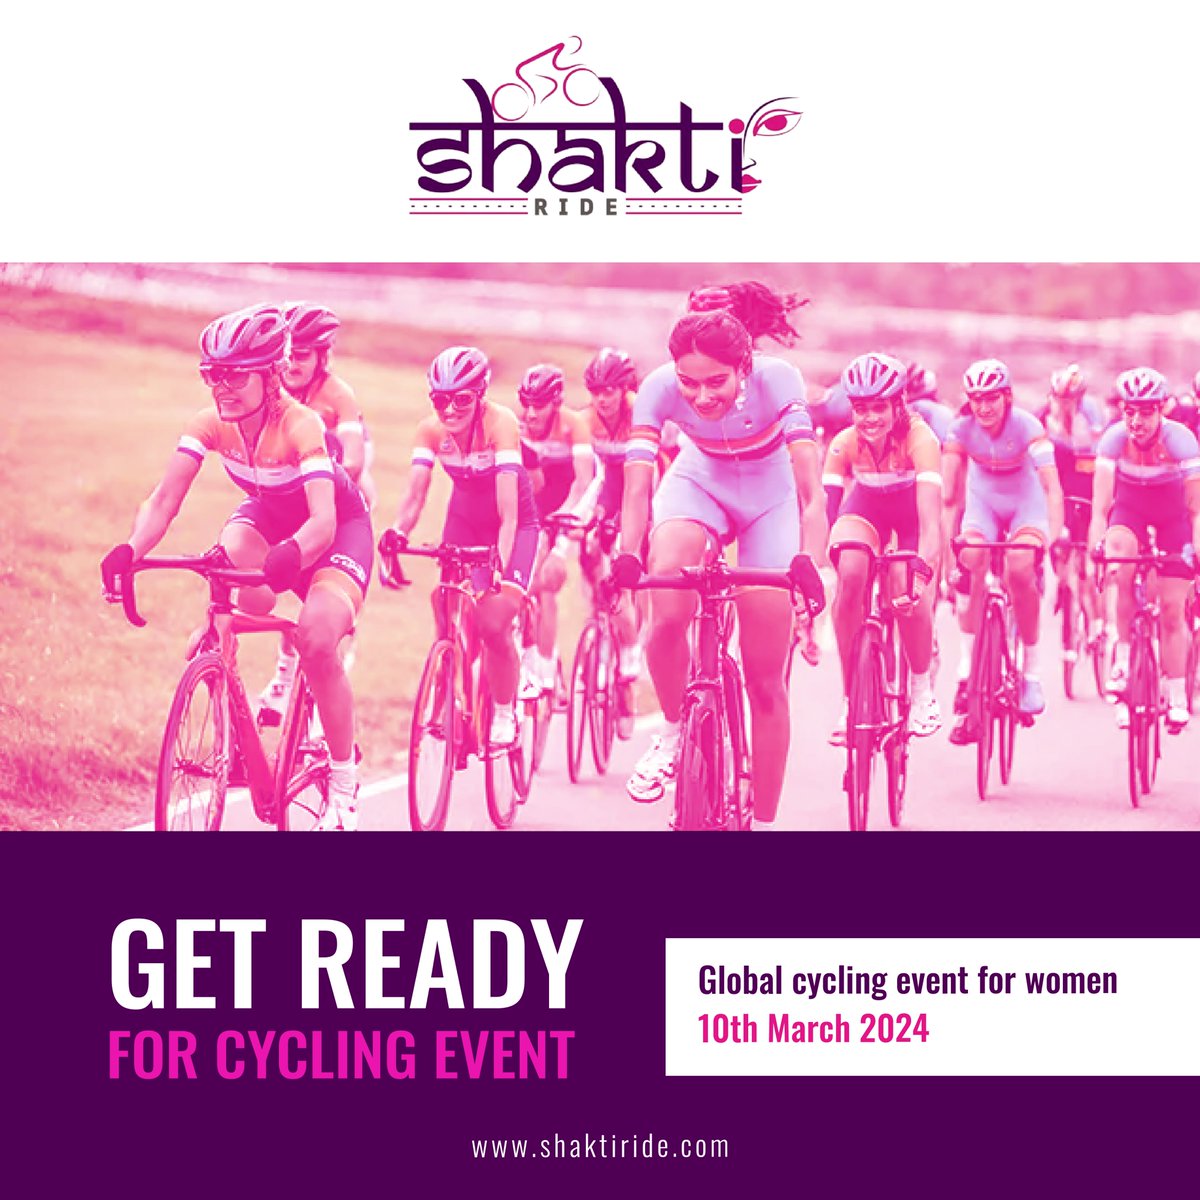 Riding strong, riding for a cause! Let's pedal together to raise awareness against cervical cancer. 🚴‍♂️🌟

#shaktiride #womenshaktiride #womenempowerment #womanempowerment #cervicalcancer #fightagainstcancer #sportsevent #sports #cyclingevent #global #strength #womencommunity